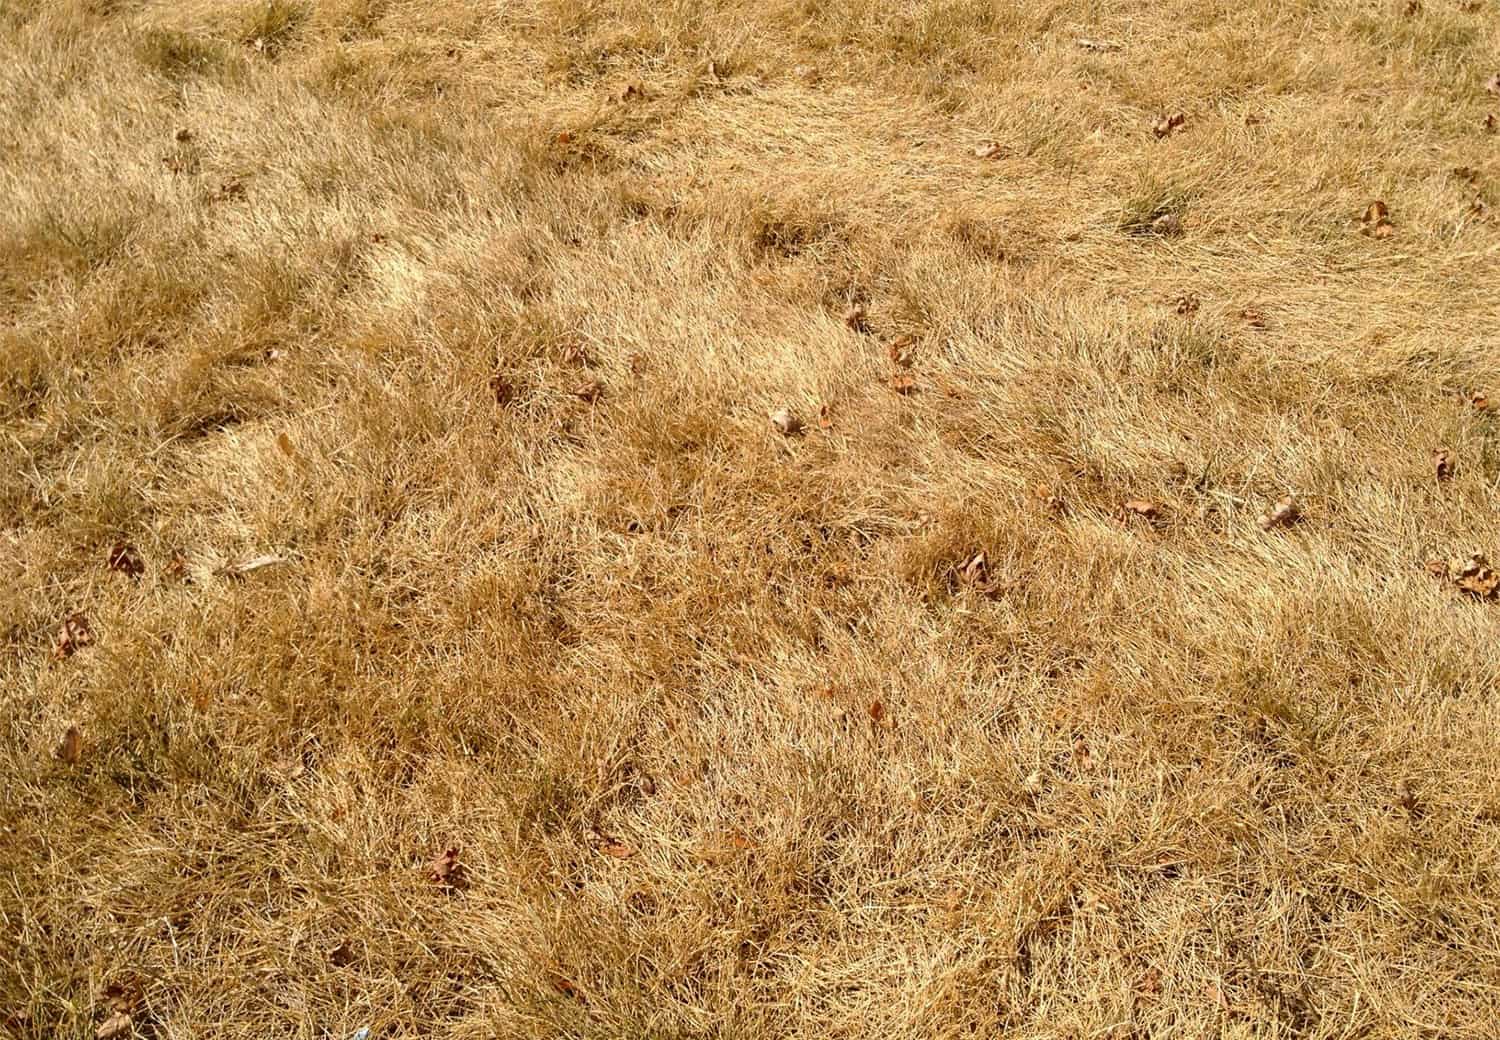 What Makes Grass Turn Brown